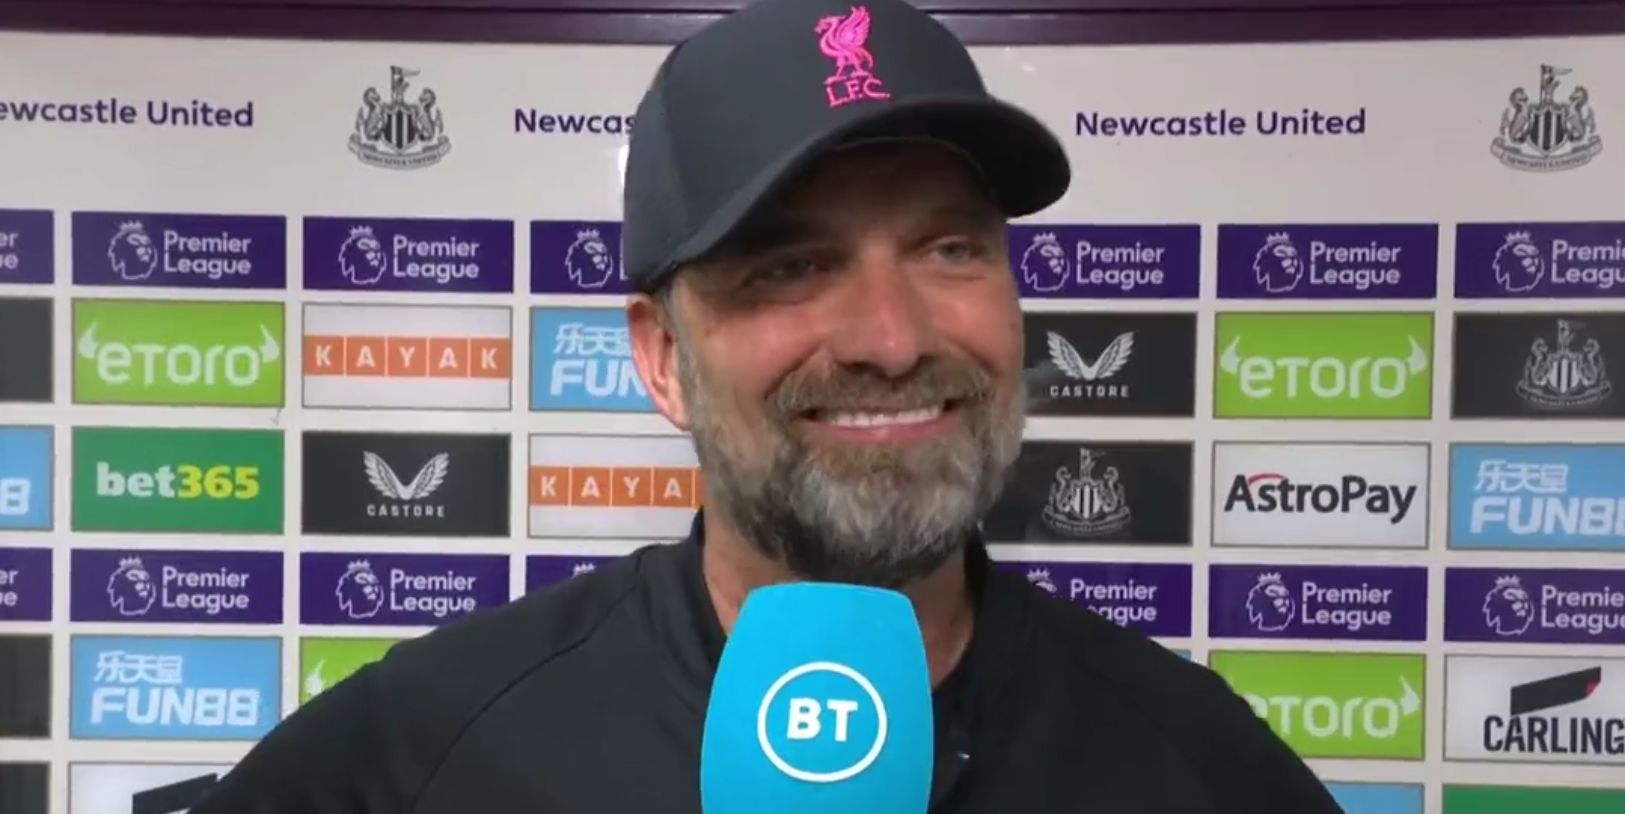 (Video) Jurgen Klopp on Andy Robertson’s “150 miles per hour sprint” which he labelled “absolutely exceptional”